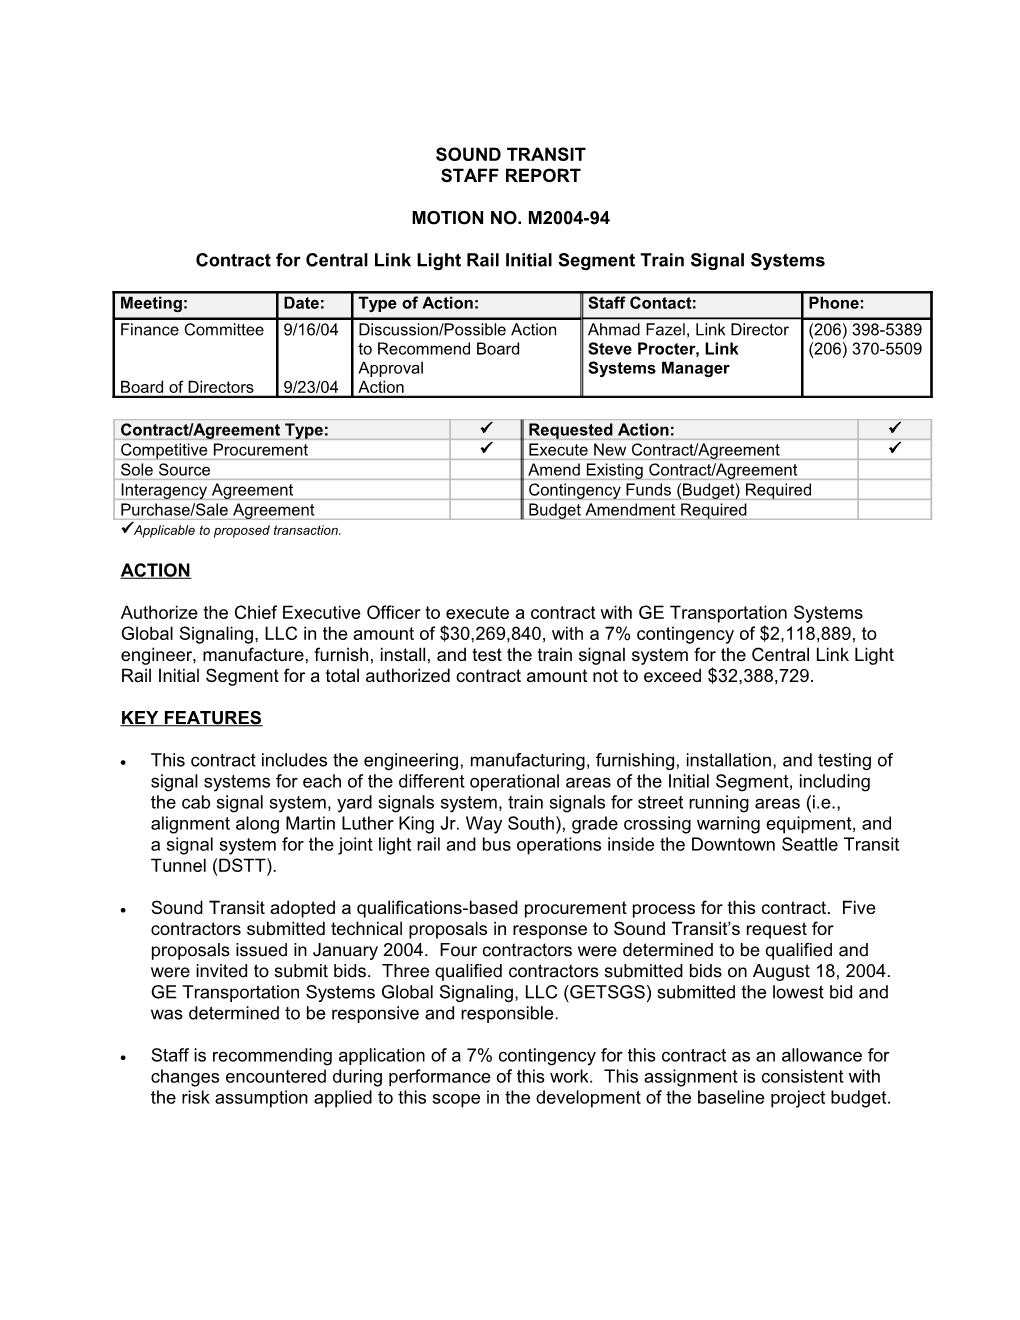 Contract for Central Link Light Rail Initial Segment Train Signal Systems